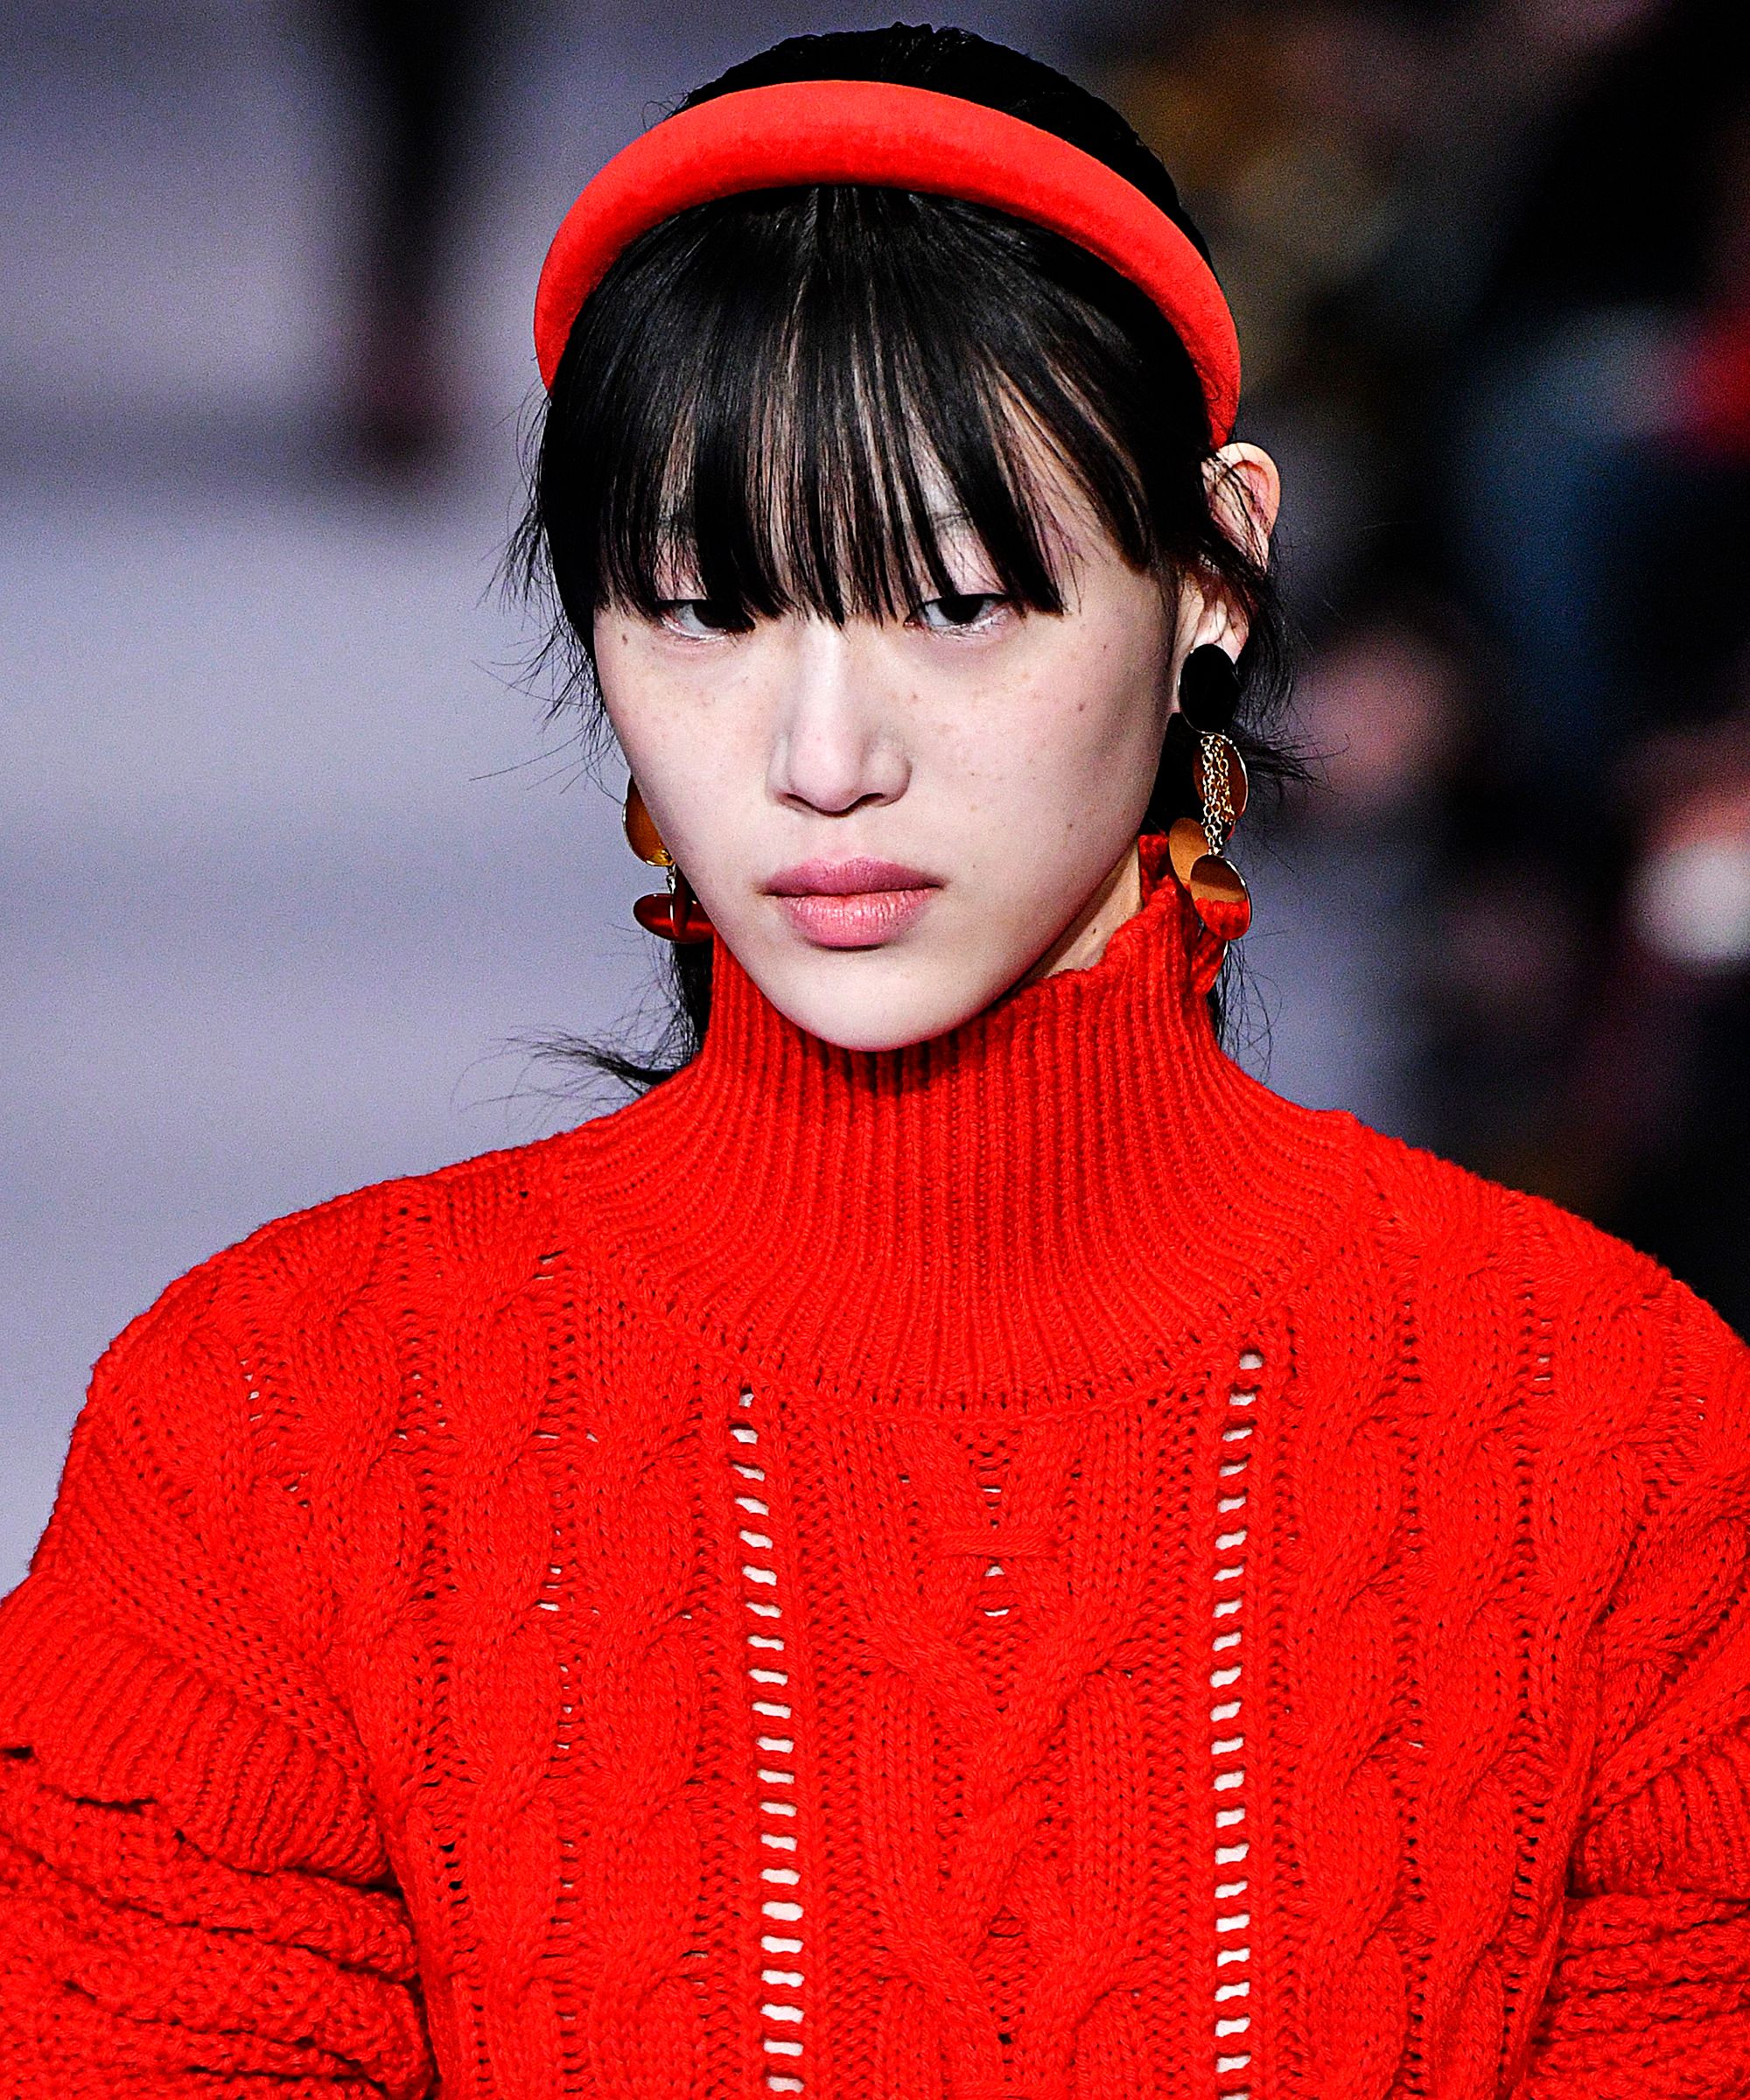 this model just showed us 11 ways to style bangs